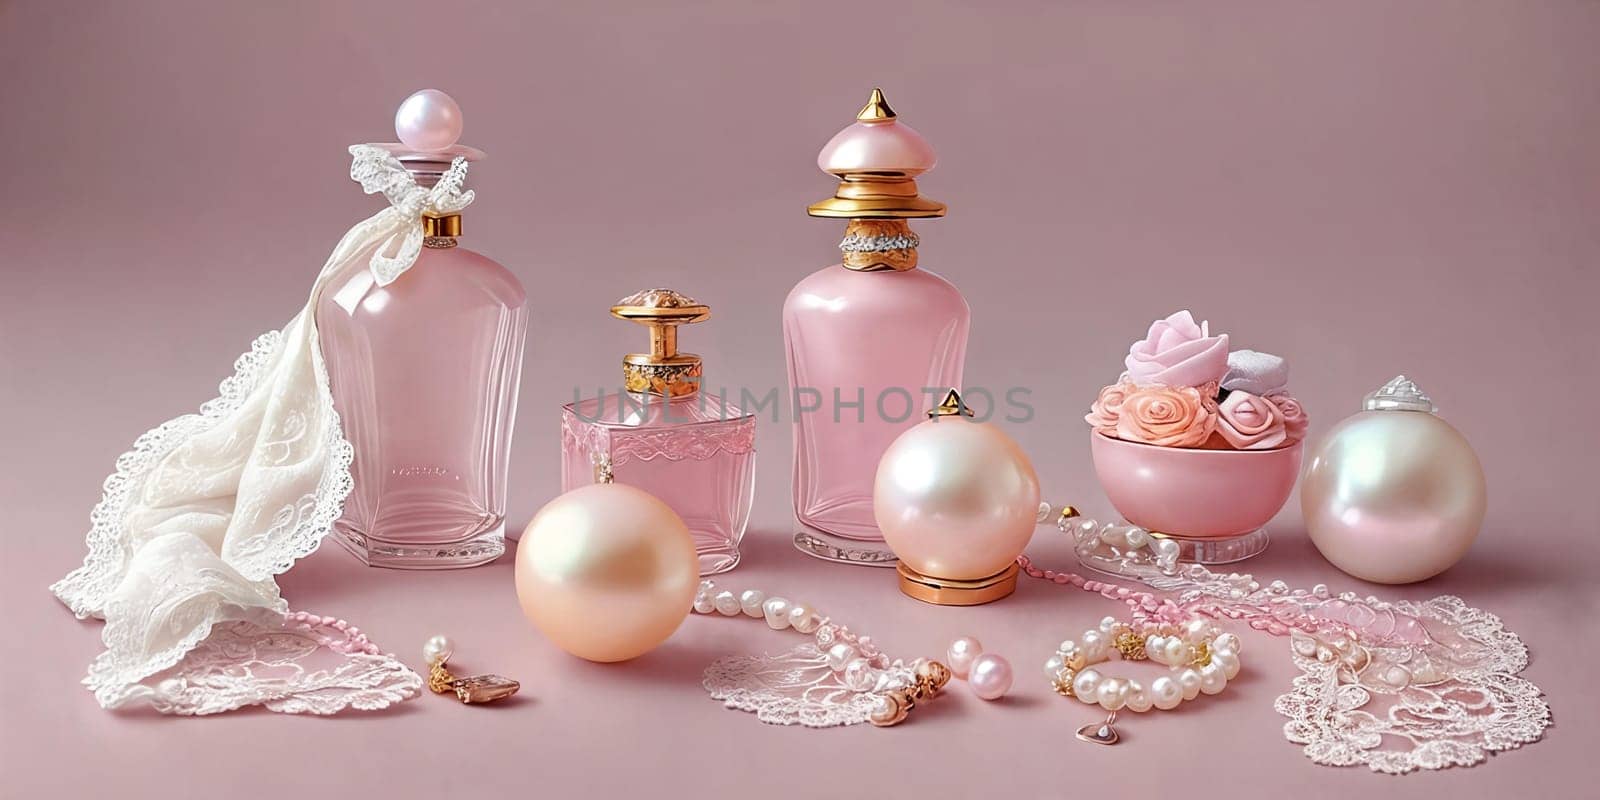 Pastel Palette. A still life scene featuring pastel-colored feminine accessories like a delicate pearl necklace, a lace handkerchief, and a vintage perfume bottle against a soft textured background for a sophisticated and timeless look.